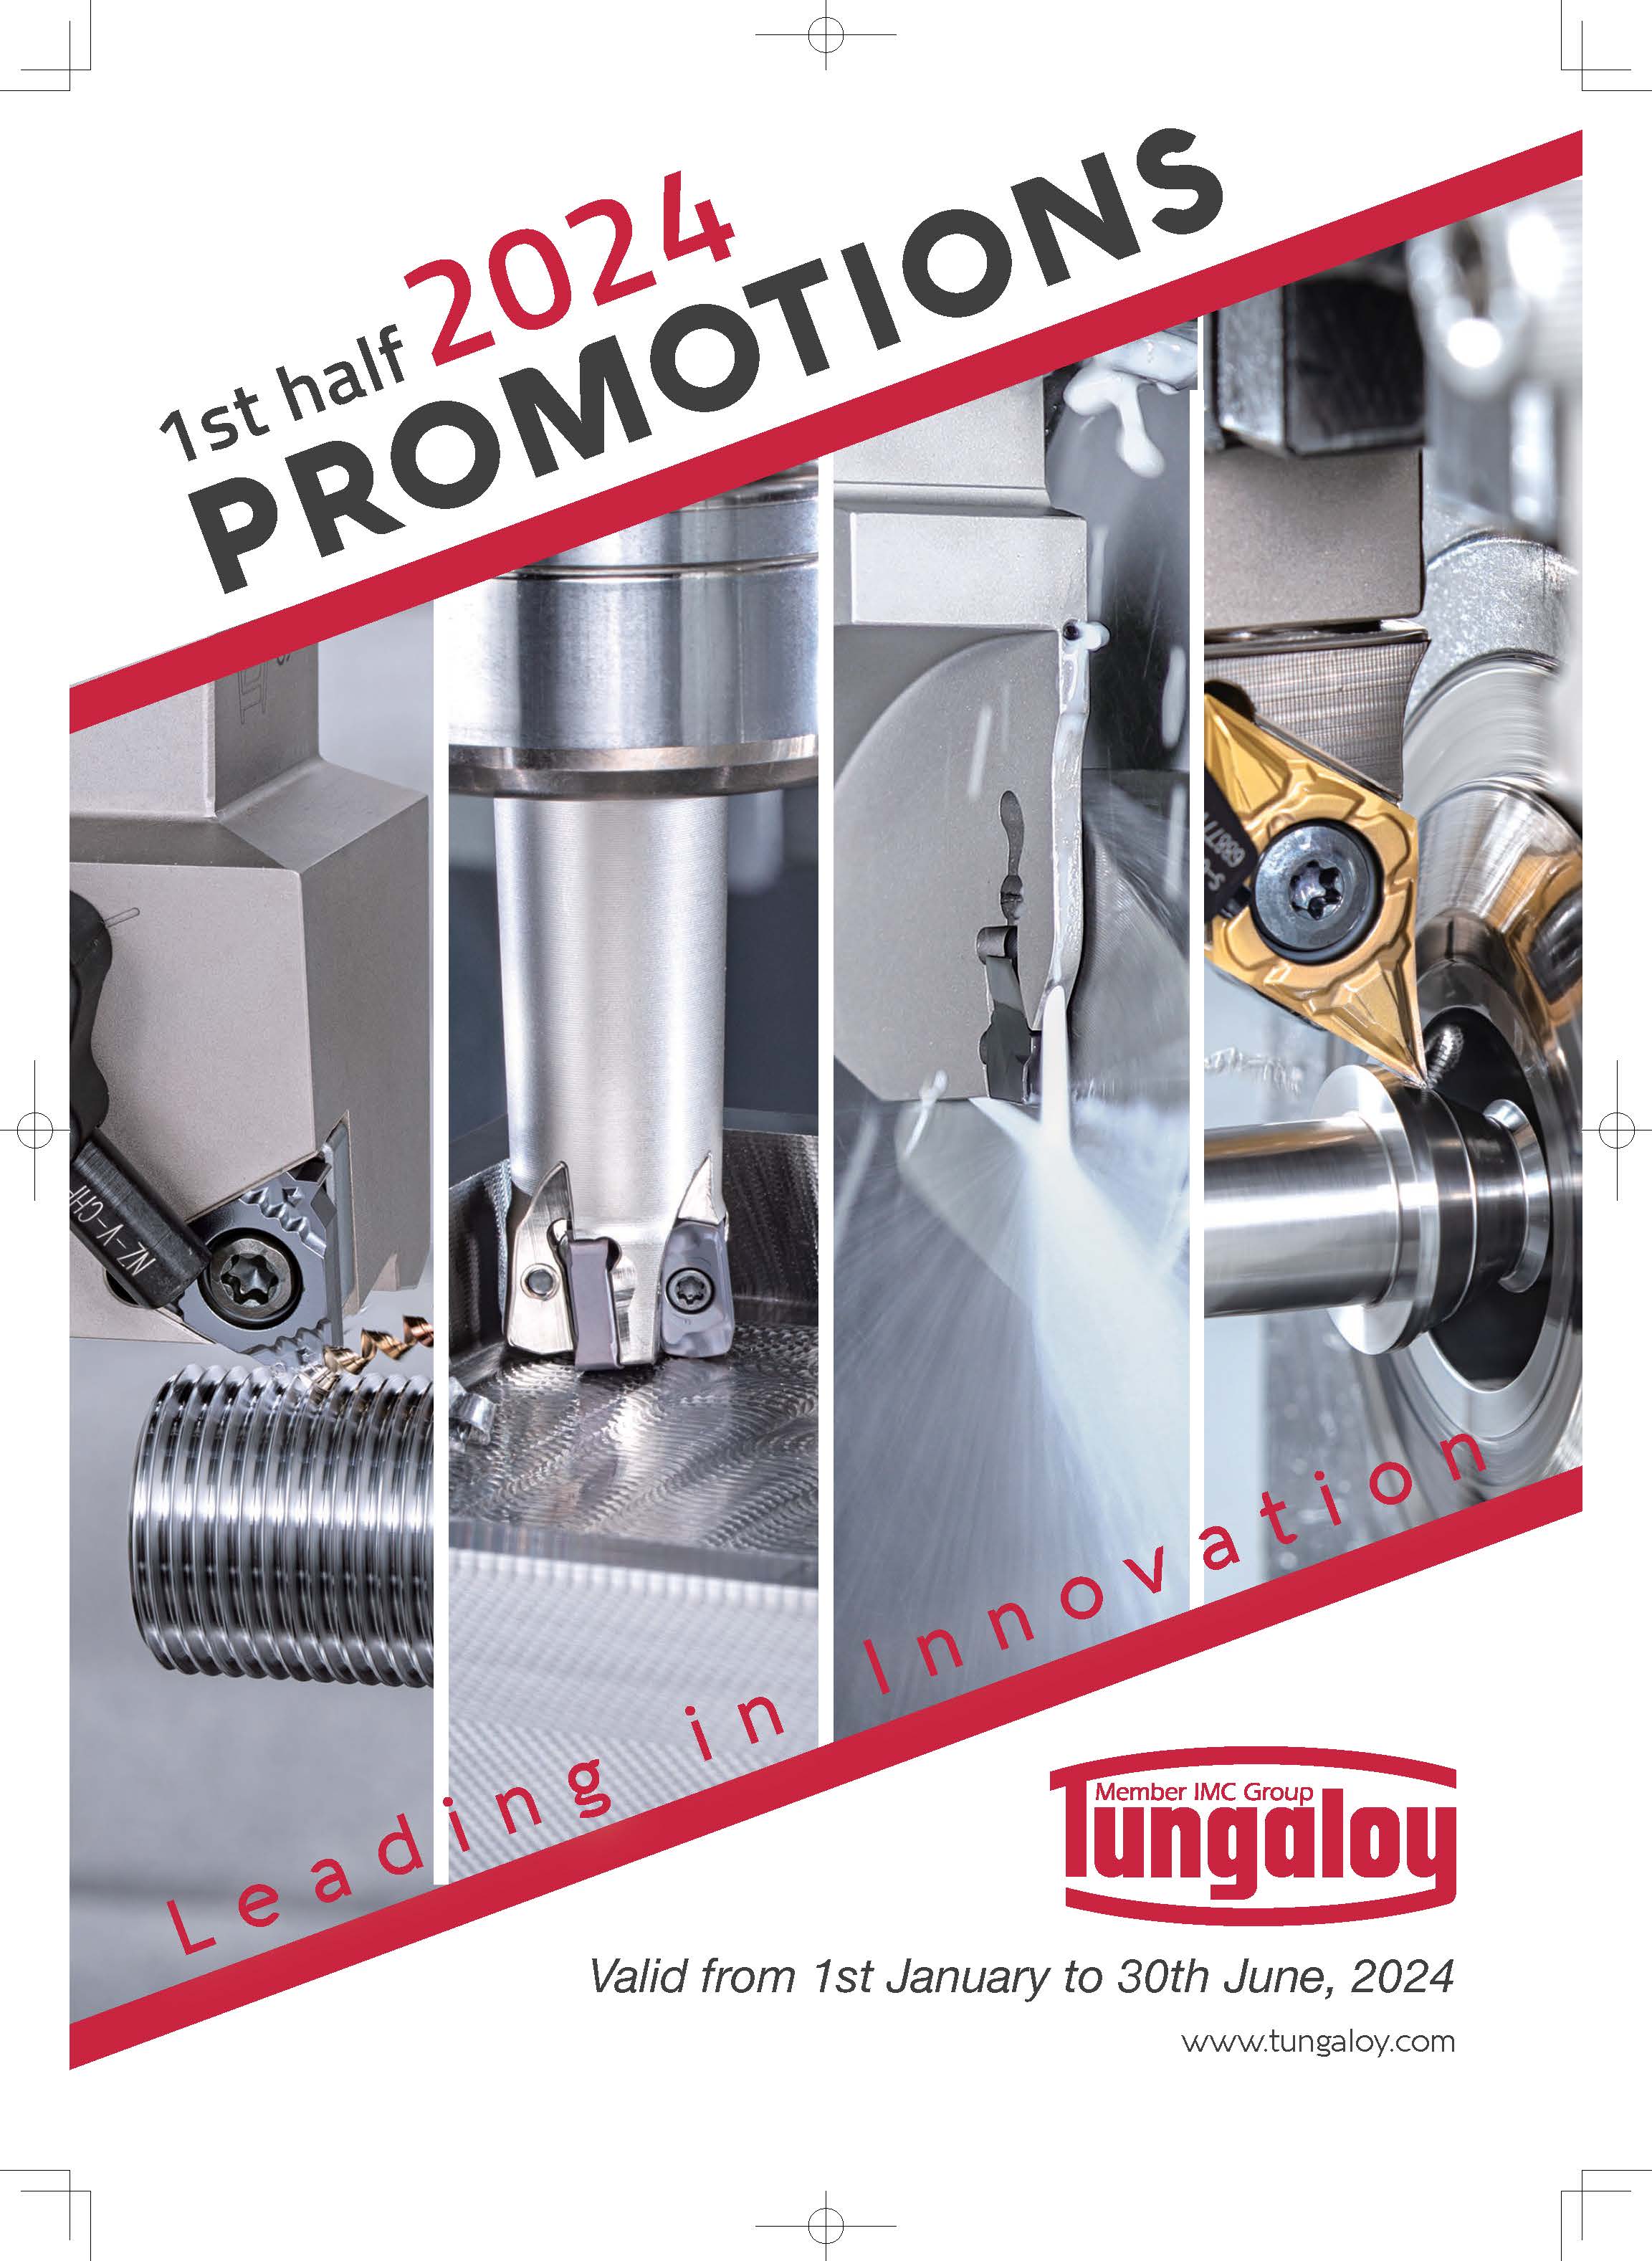 Tungaloy 1st half of 2024 promotions - valid 1.1. - 30.6.2024